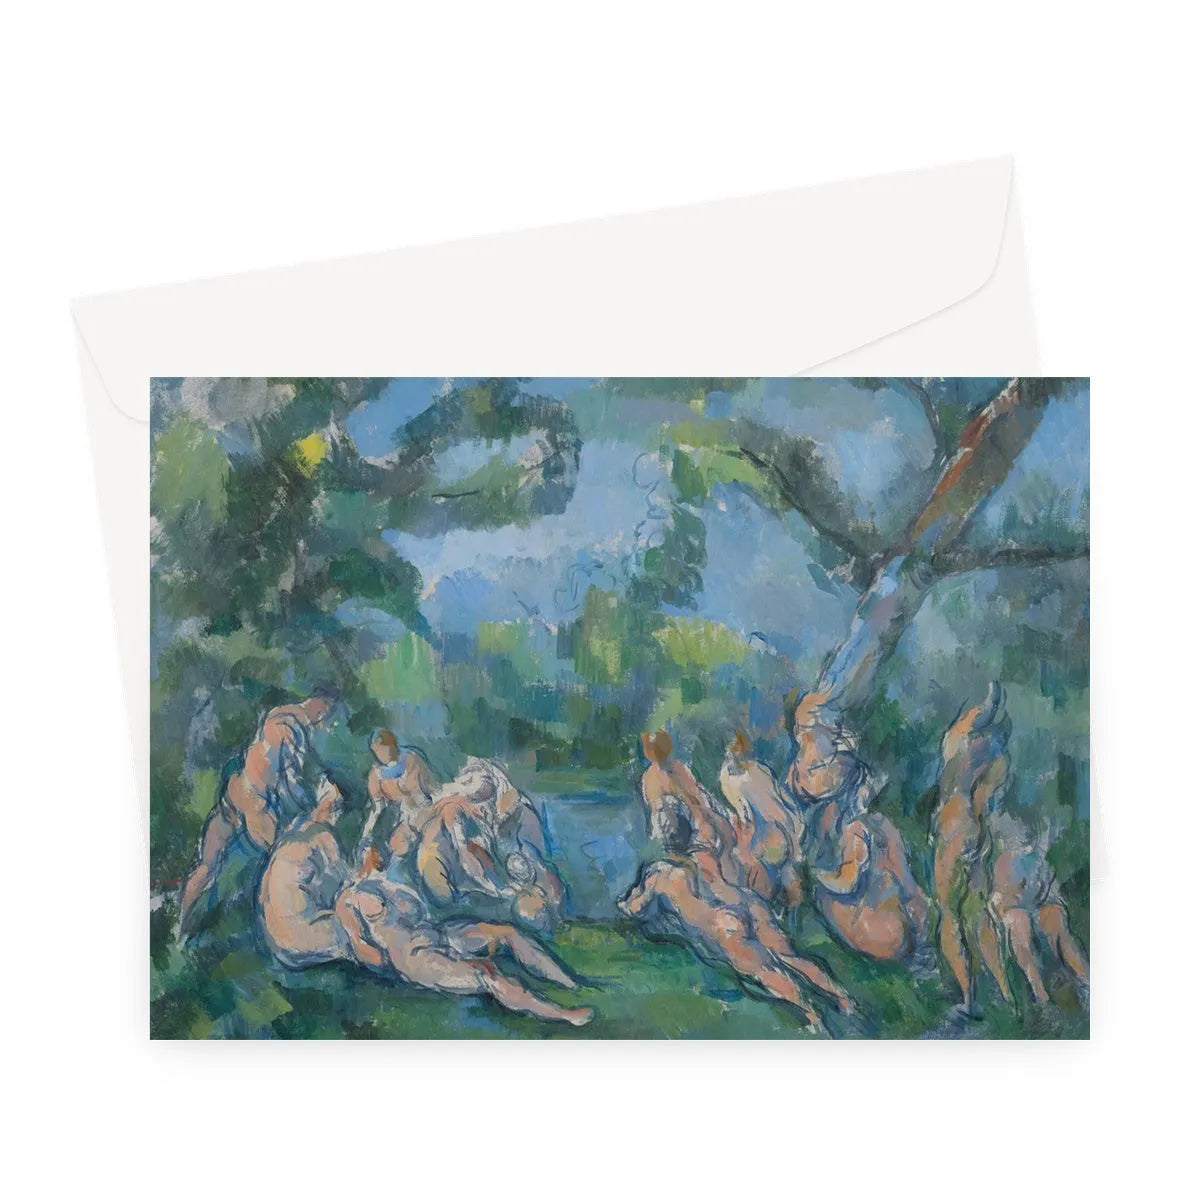 The Bathers By Paul Cezanne Greeting Card - A5 Landscape / 10 Cards - Greeting & Note Cards - Aesthetic Art